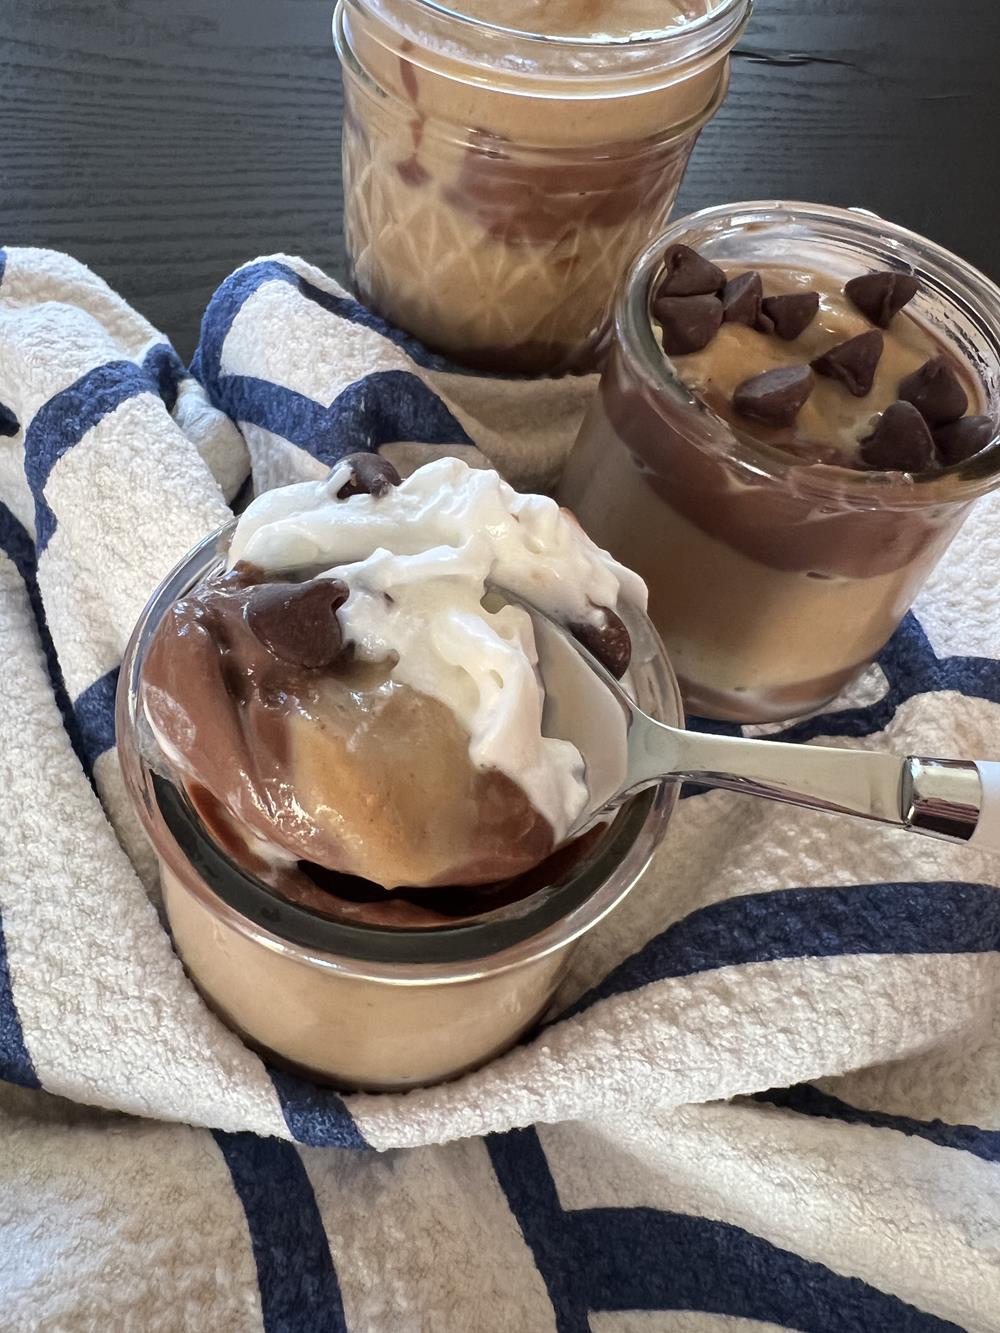 peanut butter and chocolate pudding in a glass bowl with spoon